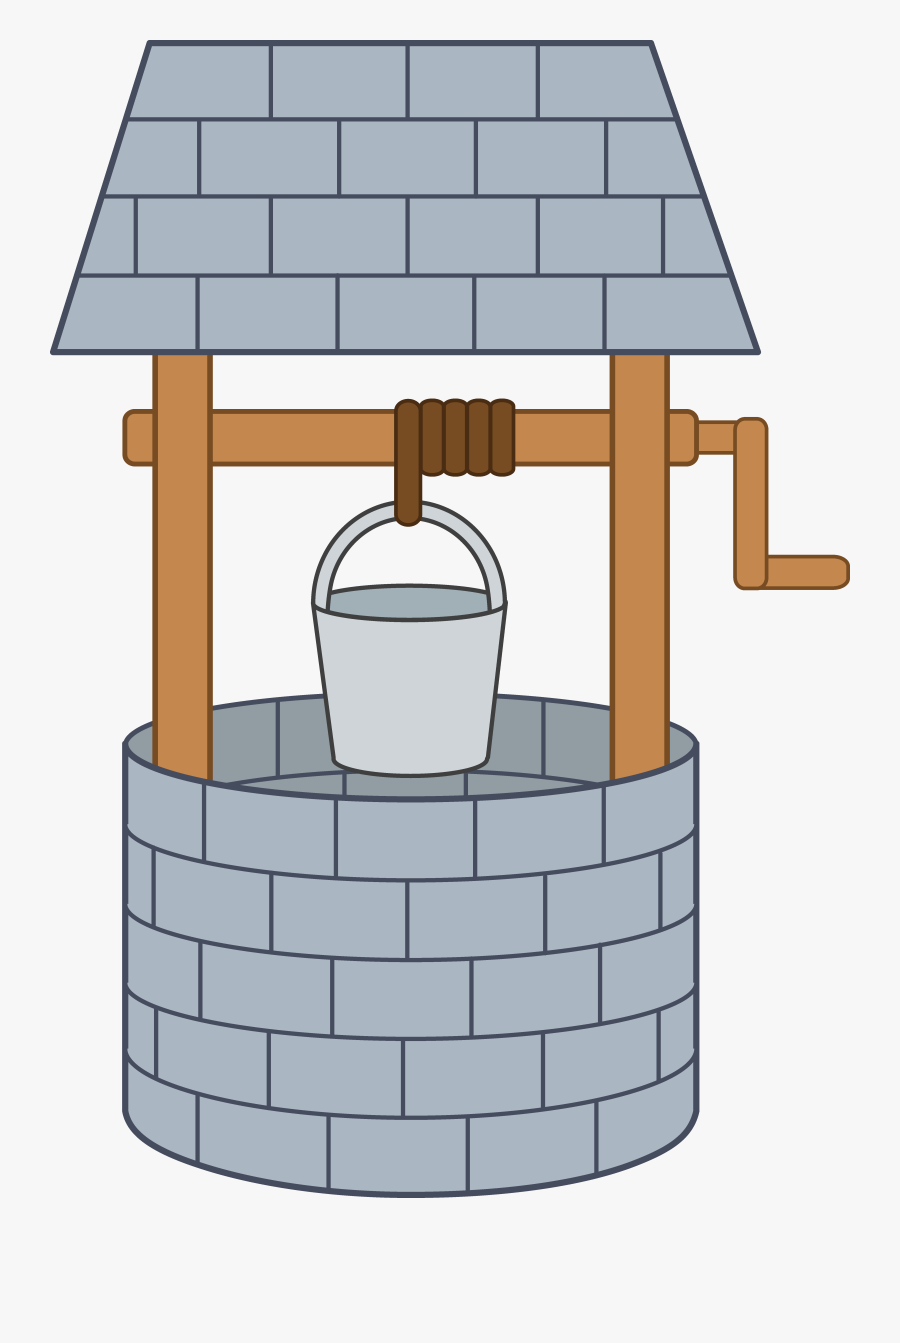 Cute Wishing Well - Wishing Well Clipart, Transparent Clipart